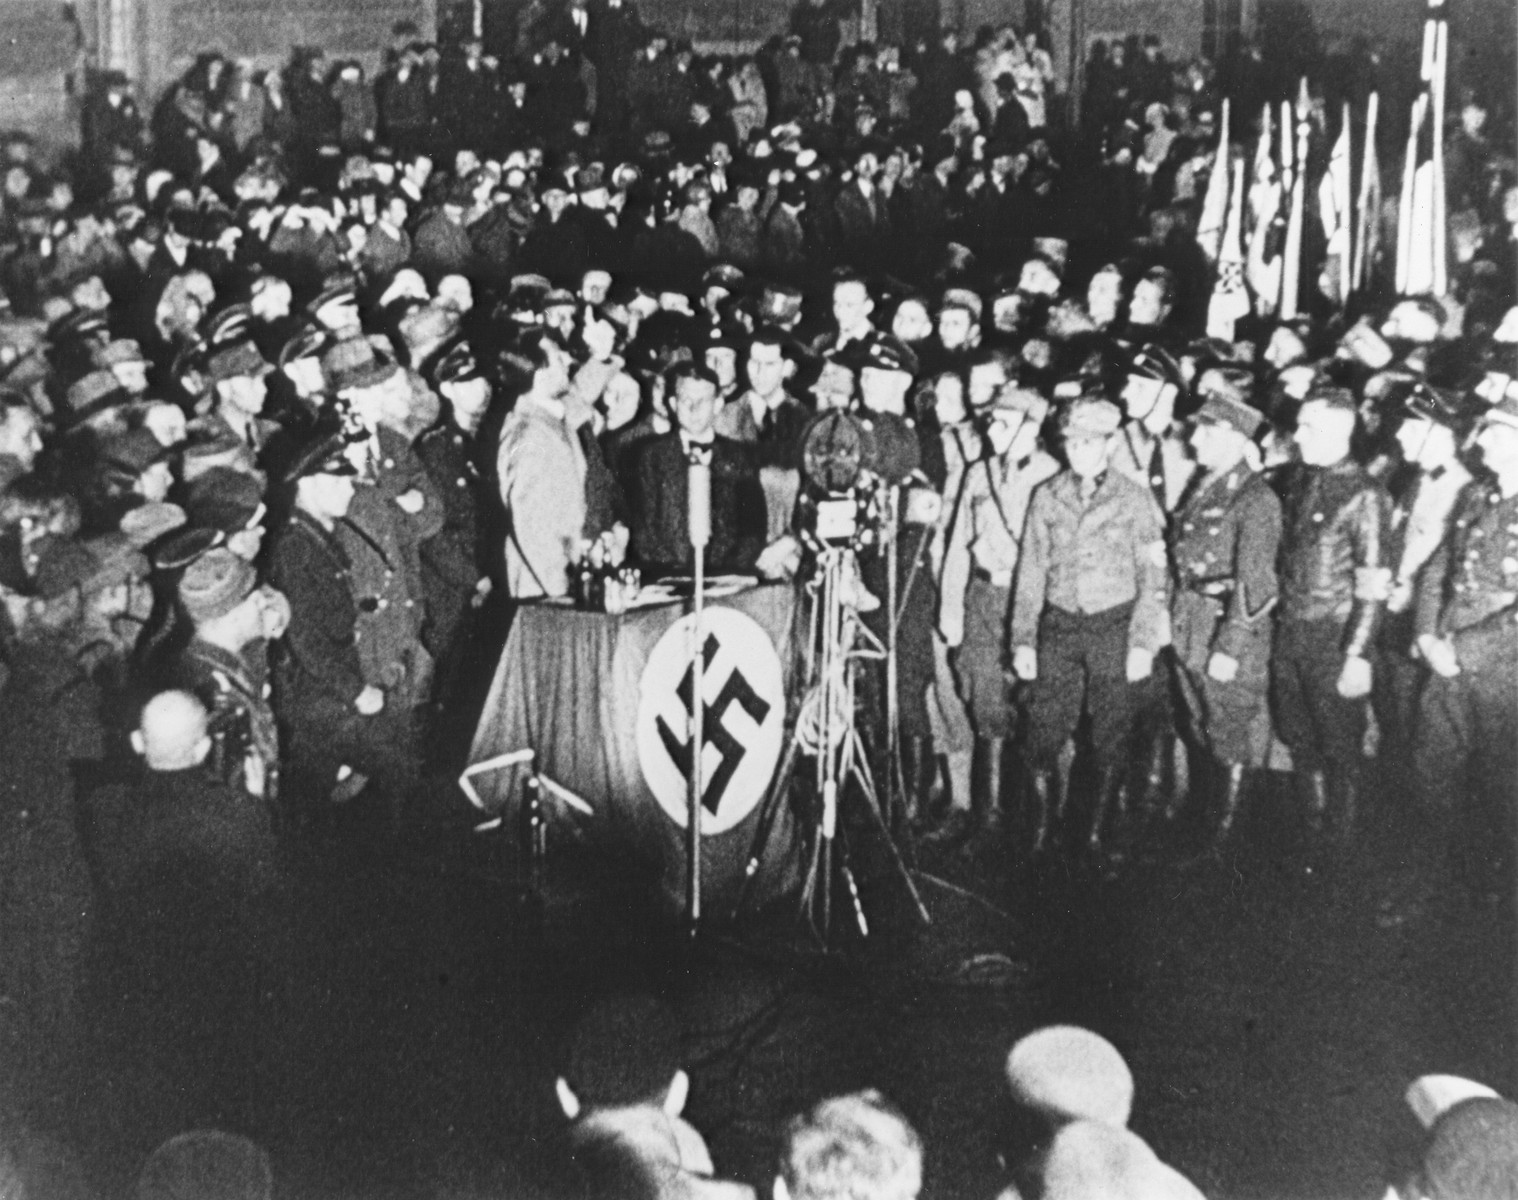 Reich Minister for Public Enlightenment and Propaganda, Joseph Goebbels, delivering a speech during the book burning on the Opernplatz. 

Still from a motion picture.